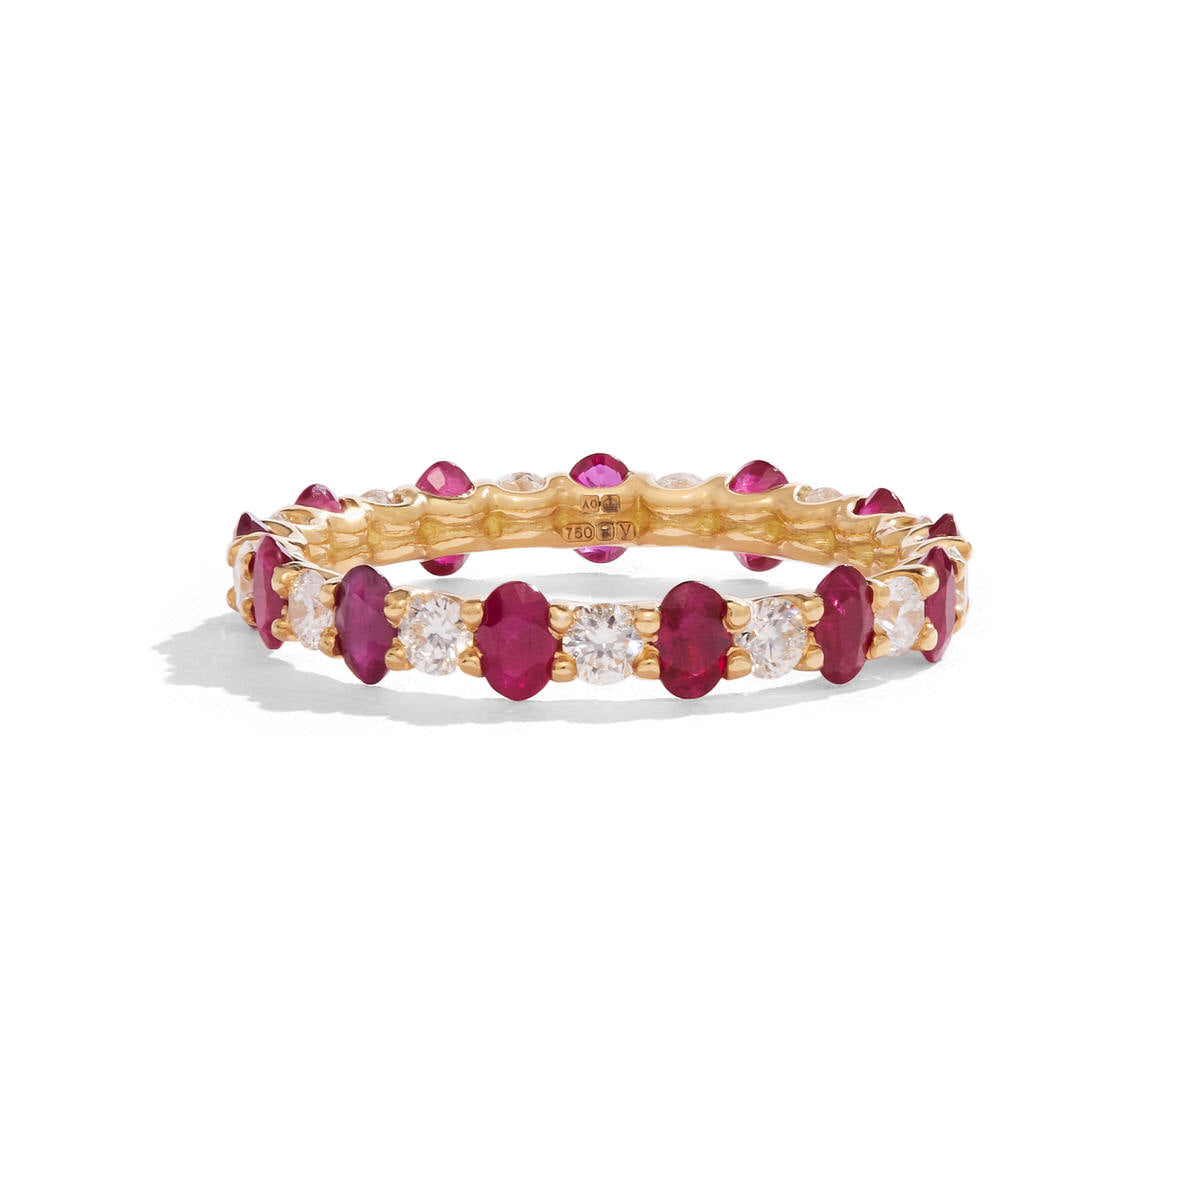 Image of oval Pink Ruby and round Diamond eternity band set in yellow gold on a white background